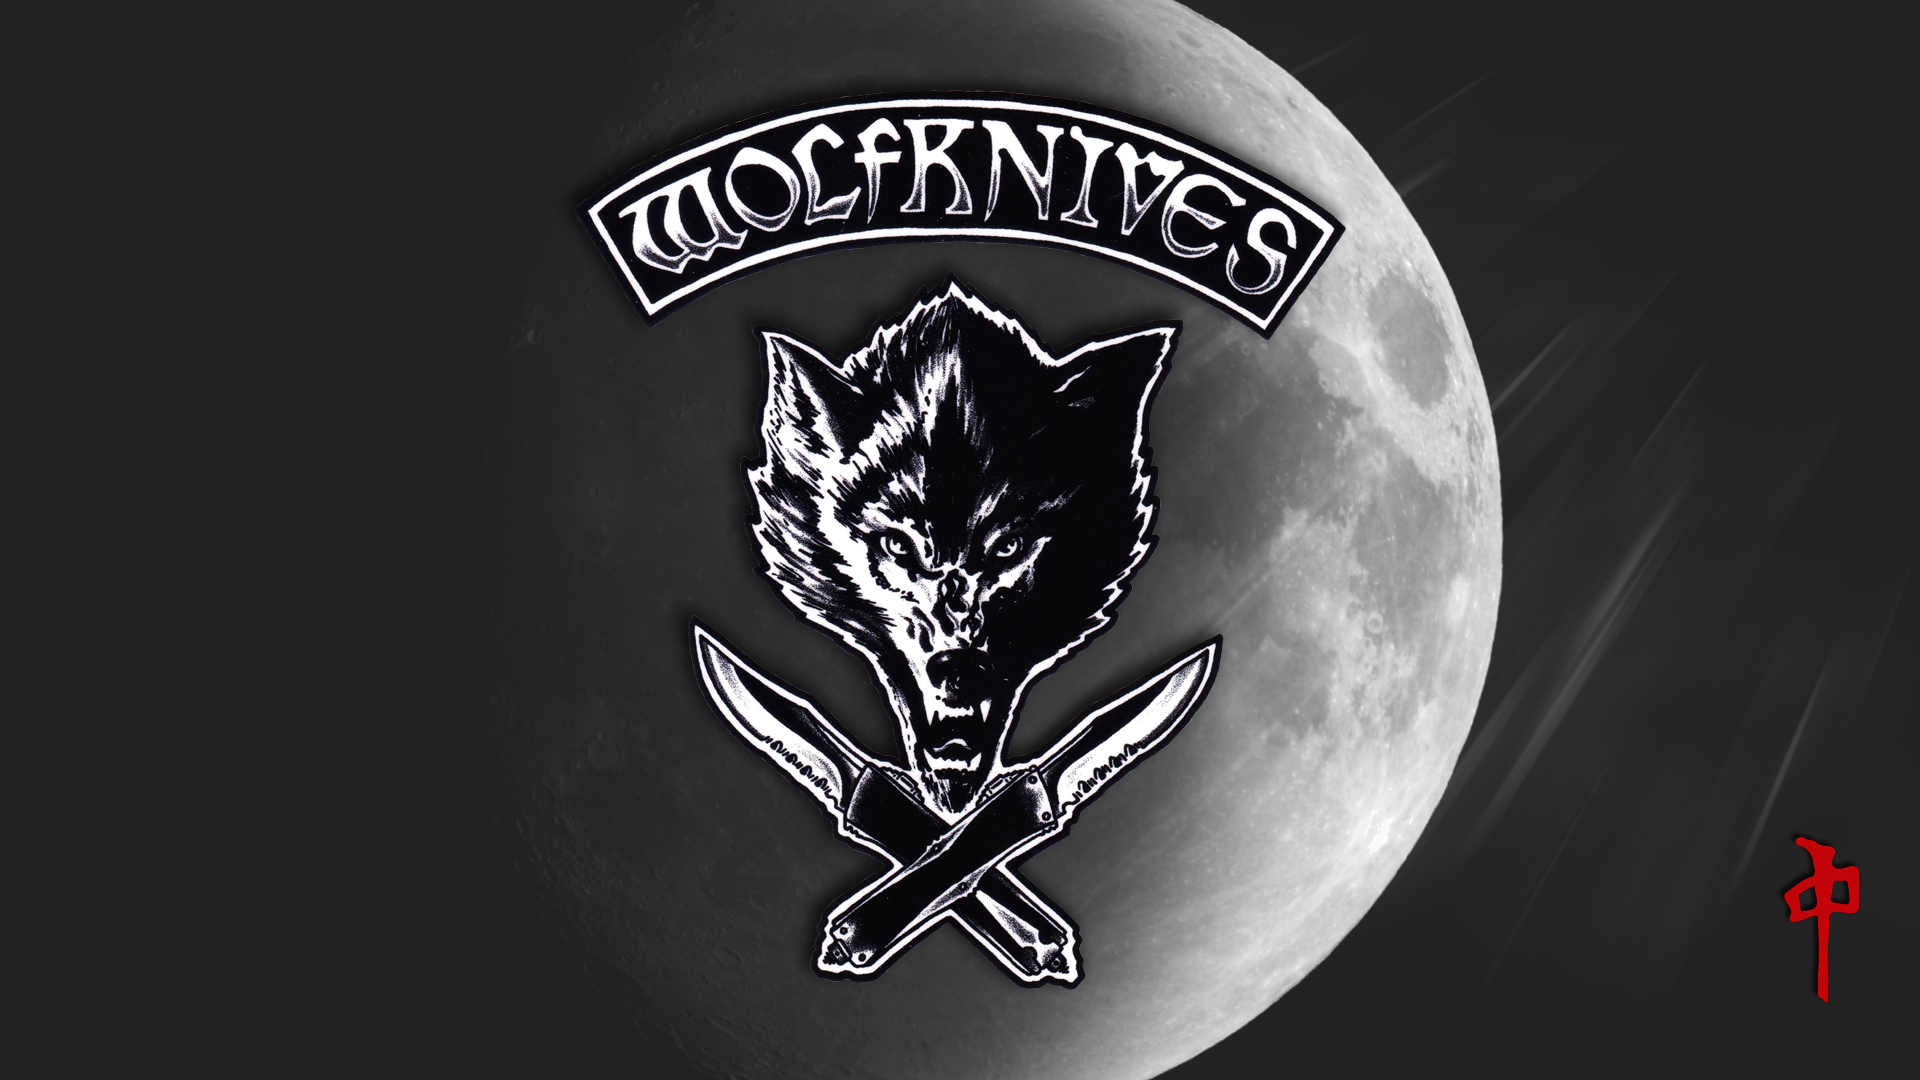 1920 x 1080 - Wolfknives